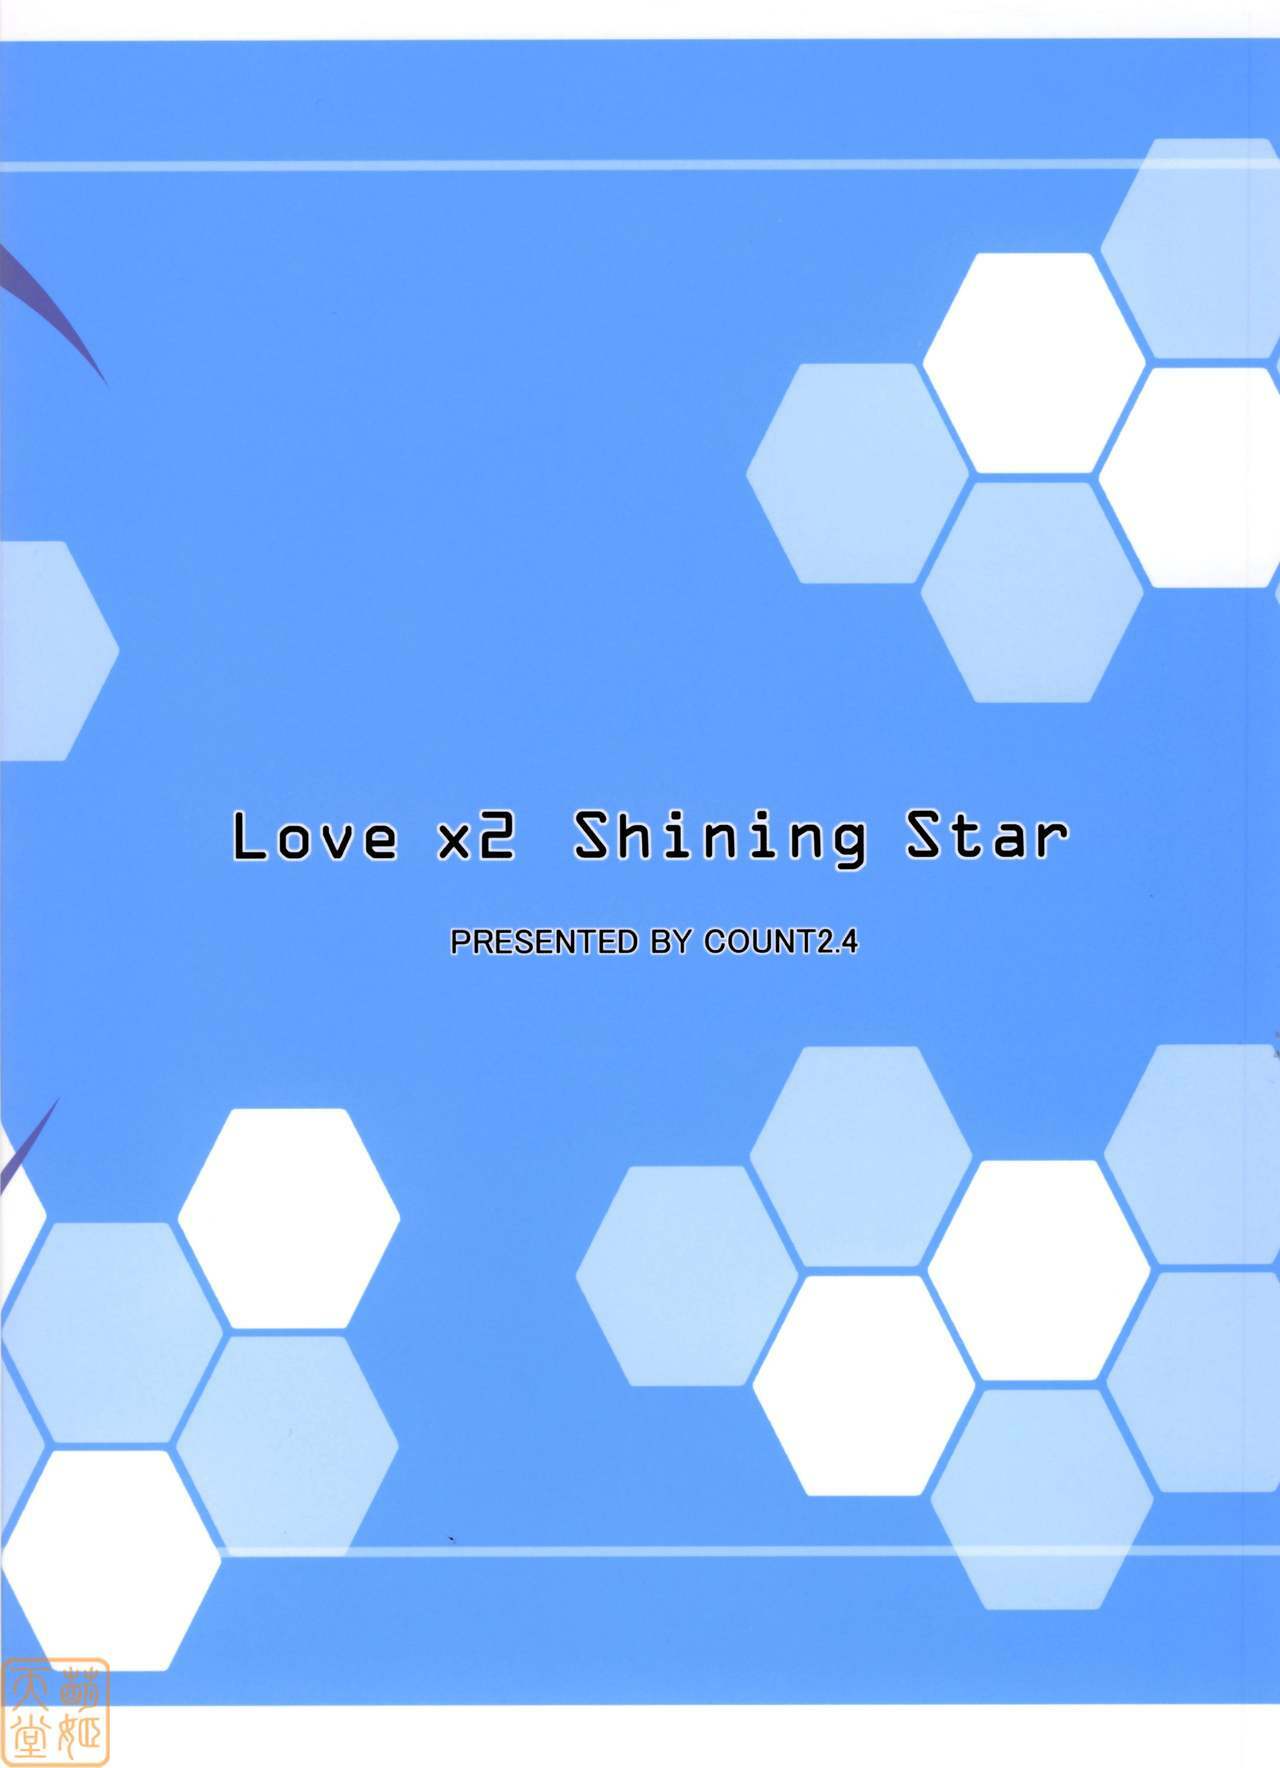 (C75) [Count2.4 (Nishi)] Love x 2 Shining Star (THE iDOLM@STER) [Chinese] [萌姬天堂] page 30 full